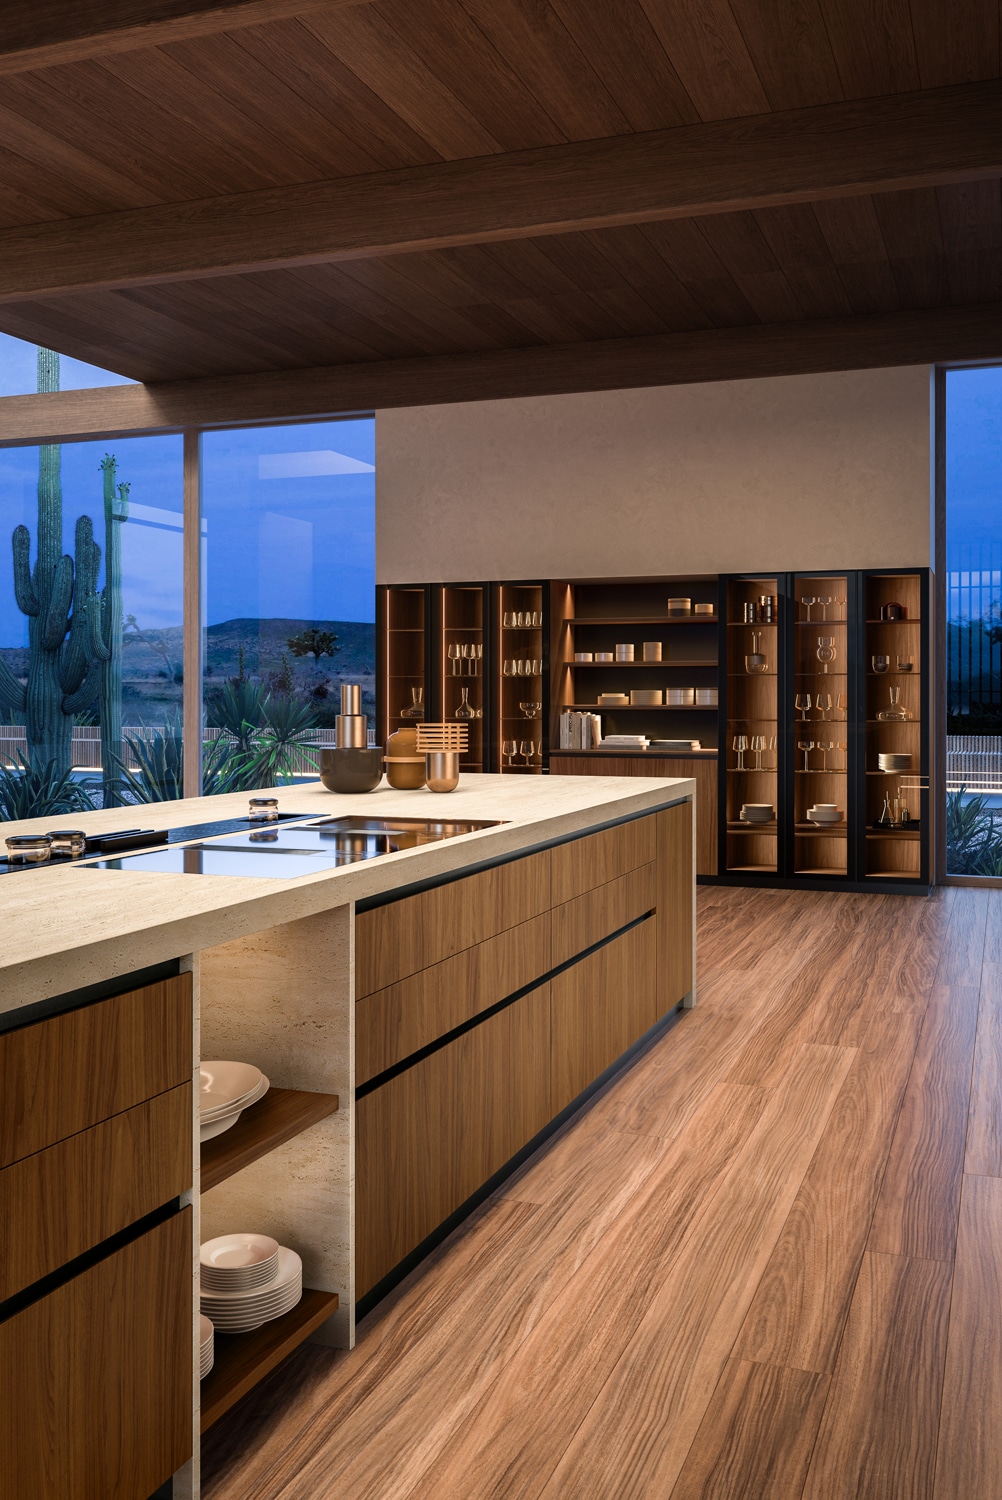 View of the island in walnut and the wall unit with glass cabinets with black frame and walnut back panels.